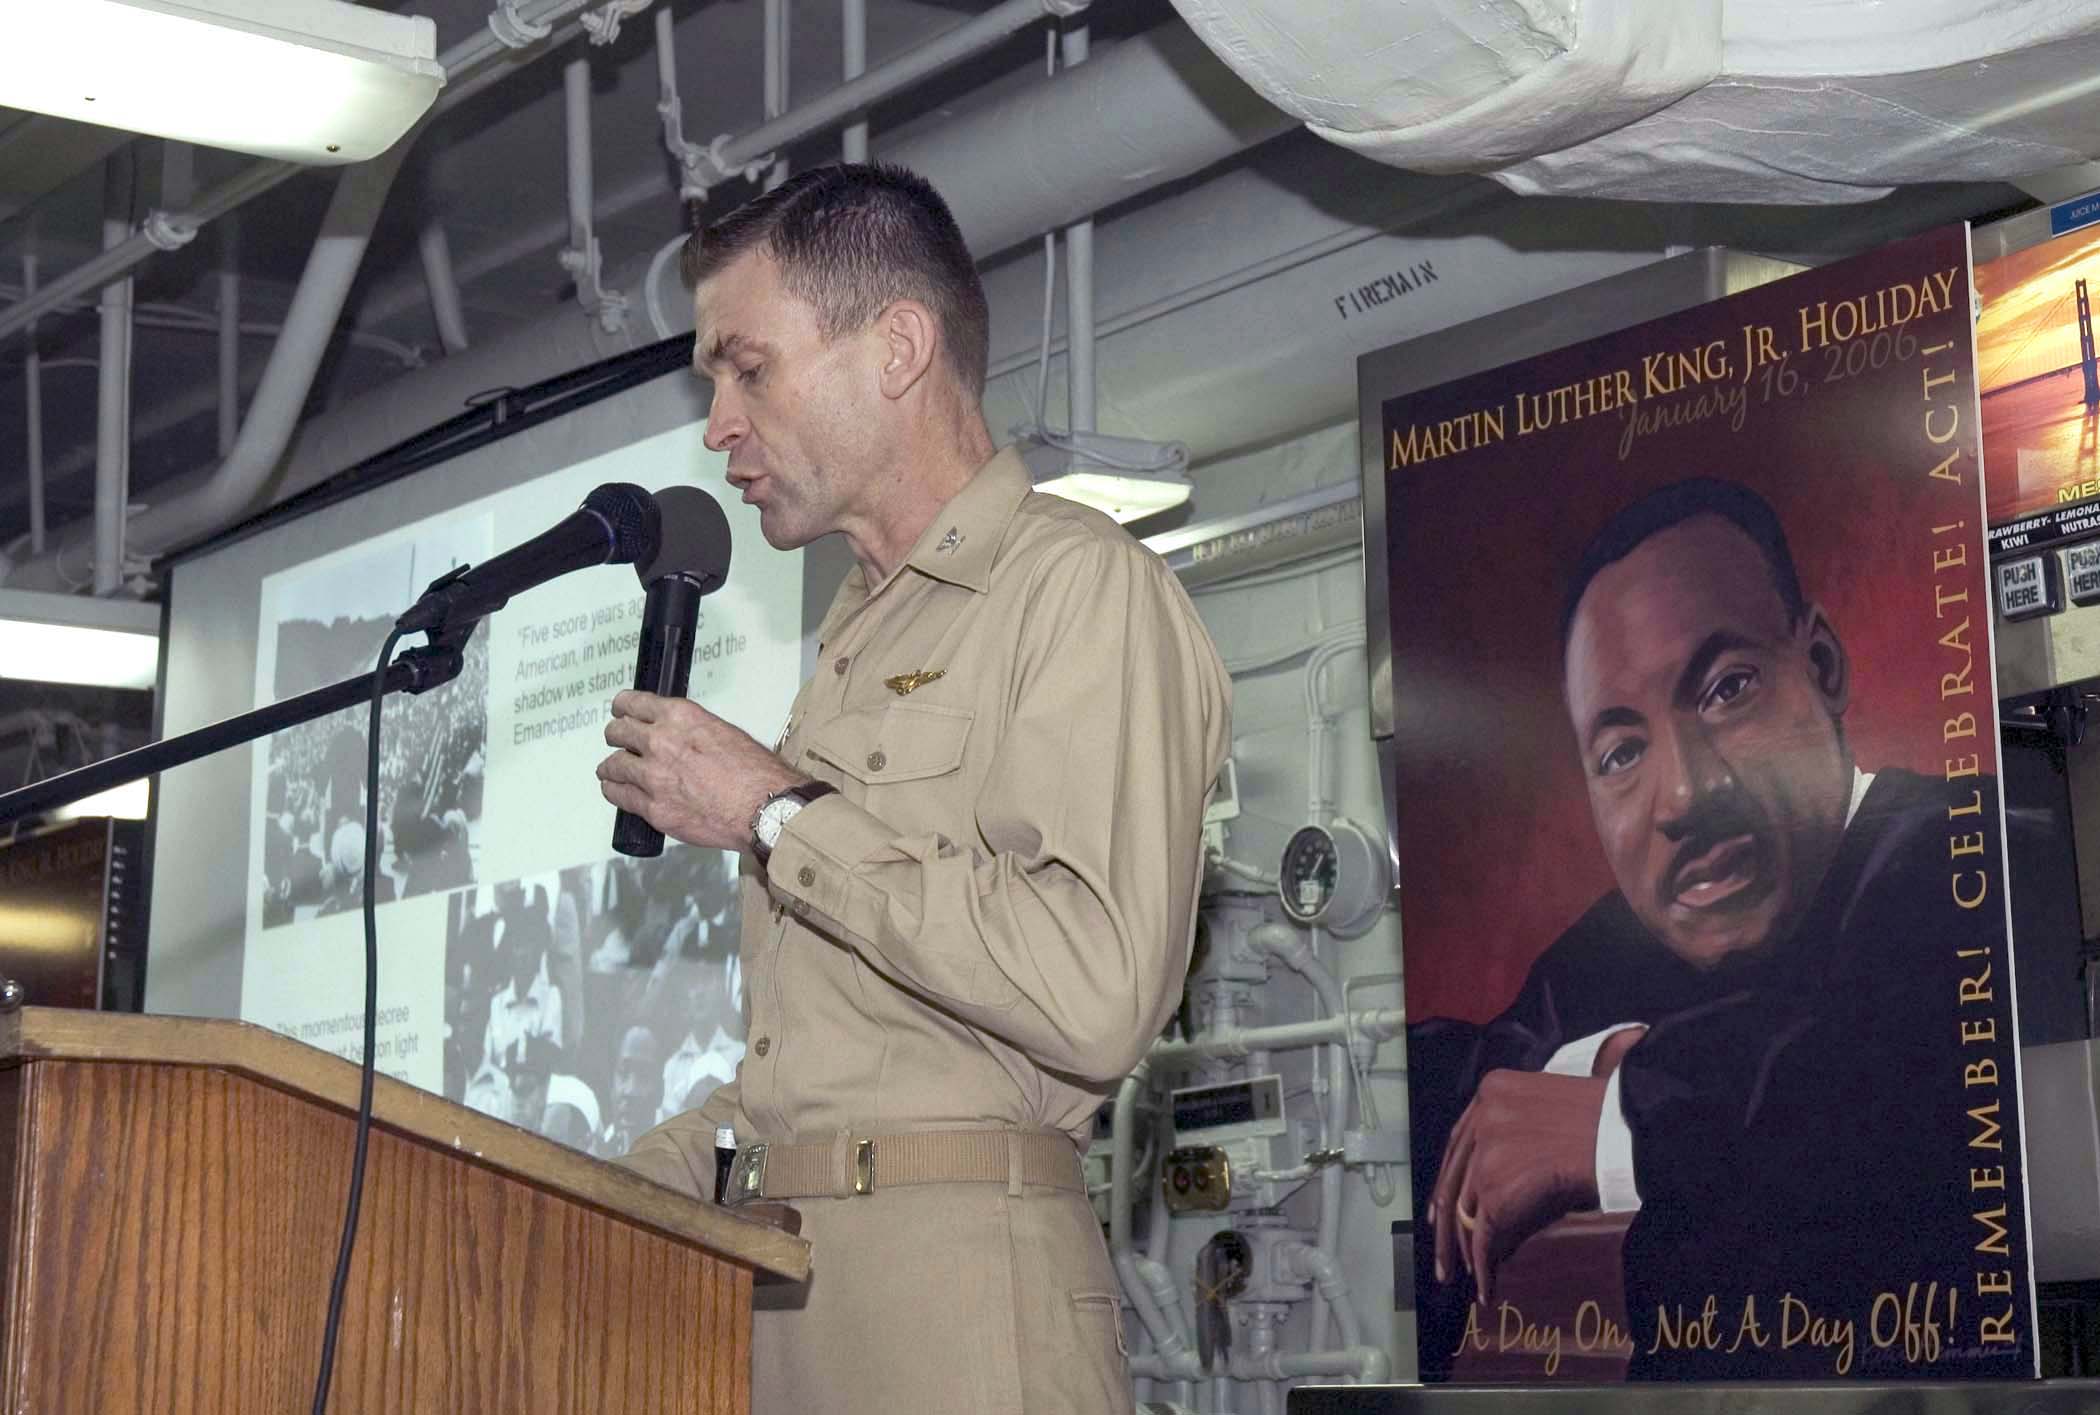 US Navy 060116-N-5384B-006 U.S. Navy Capt. C. Andrew McCawley gives a speech during a ceremony celebrating the life of the late Dr. Martin Luther King Jr